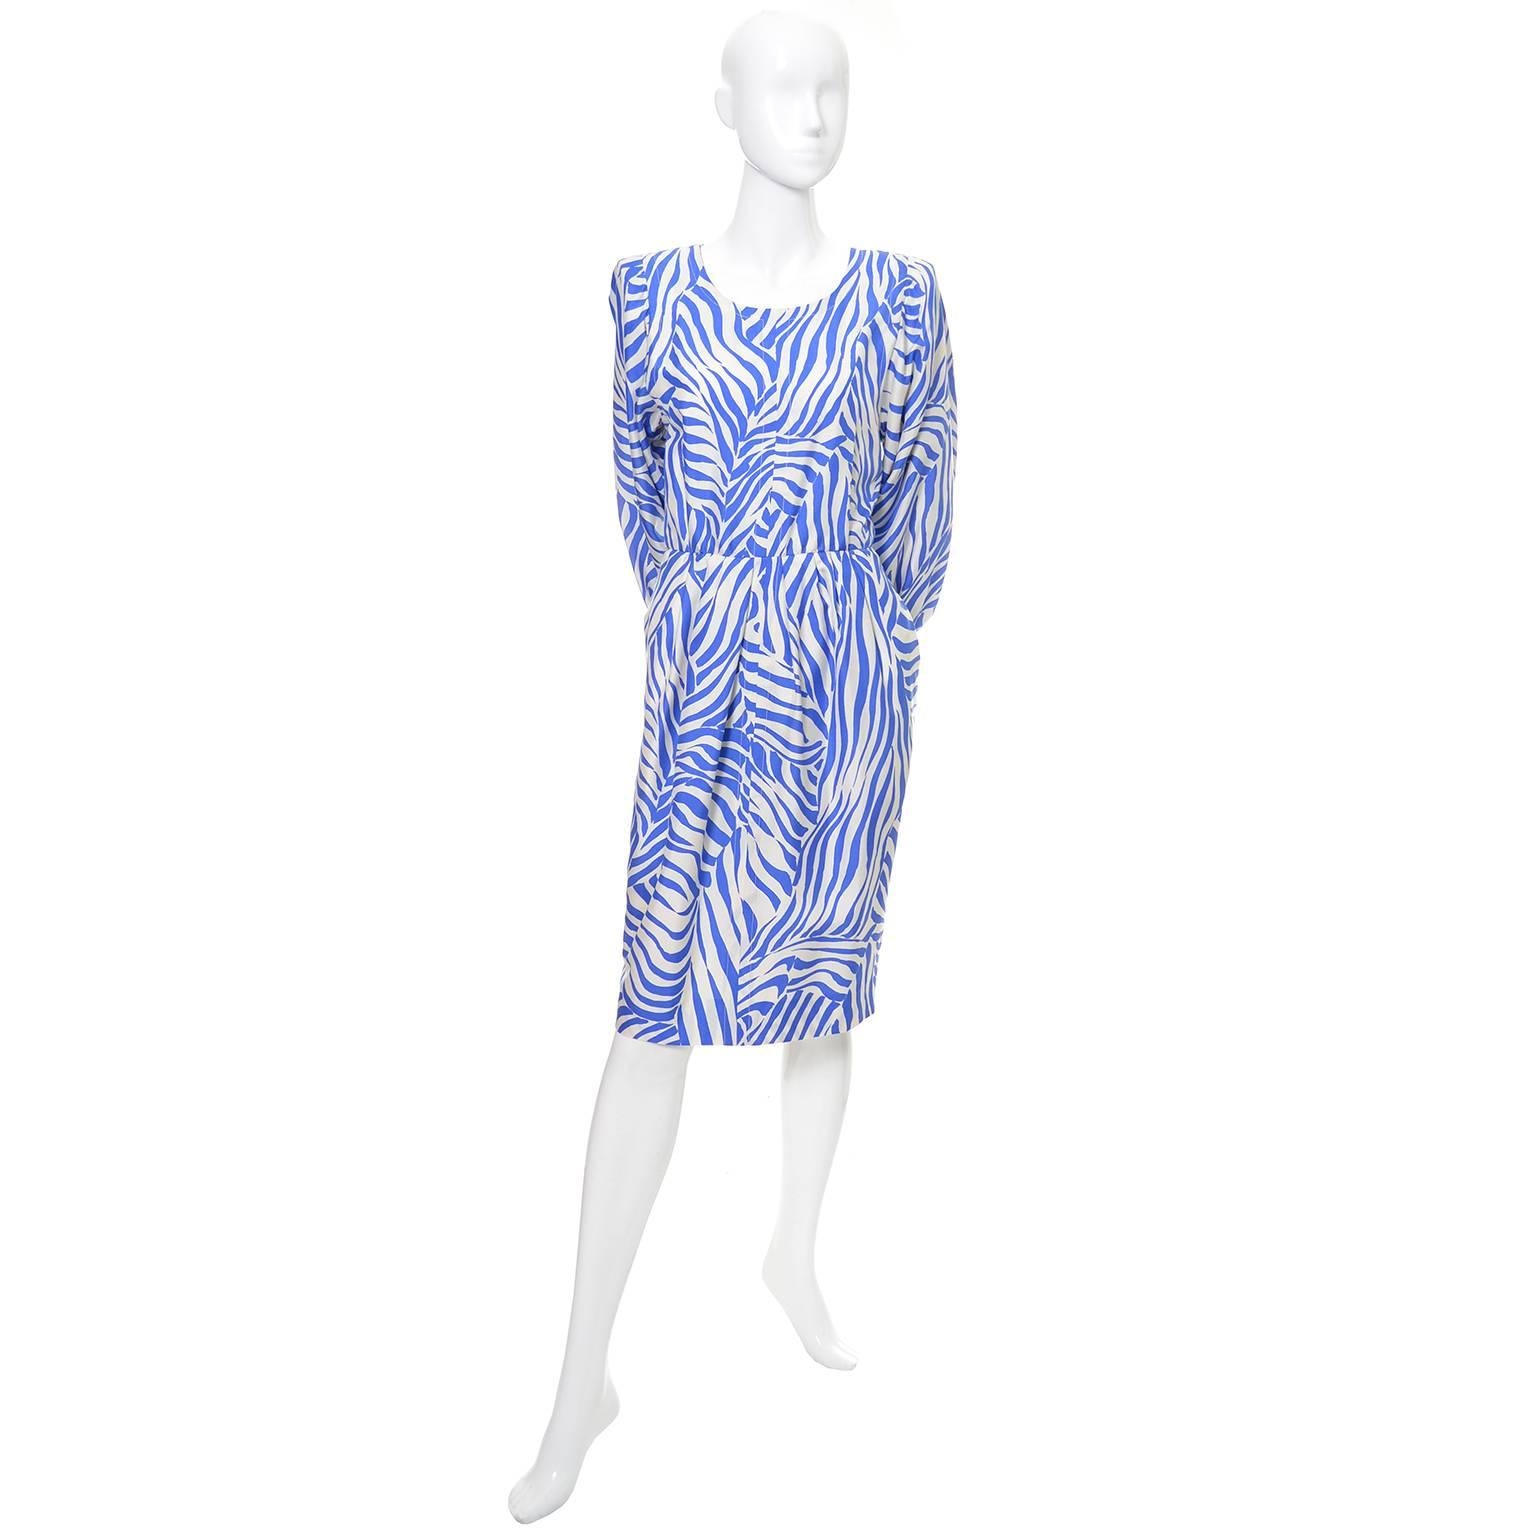 This vintage abstract zebra print silk YSL dress was made in France in the 1980's. The dress is fully lined and has shoulder pads and both back buttons and a back zipper.  Labeled a size 36, (approximately a US size 4), the dress is in excellent